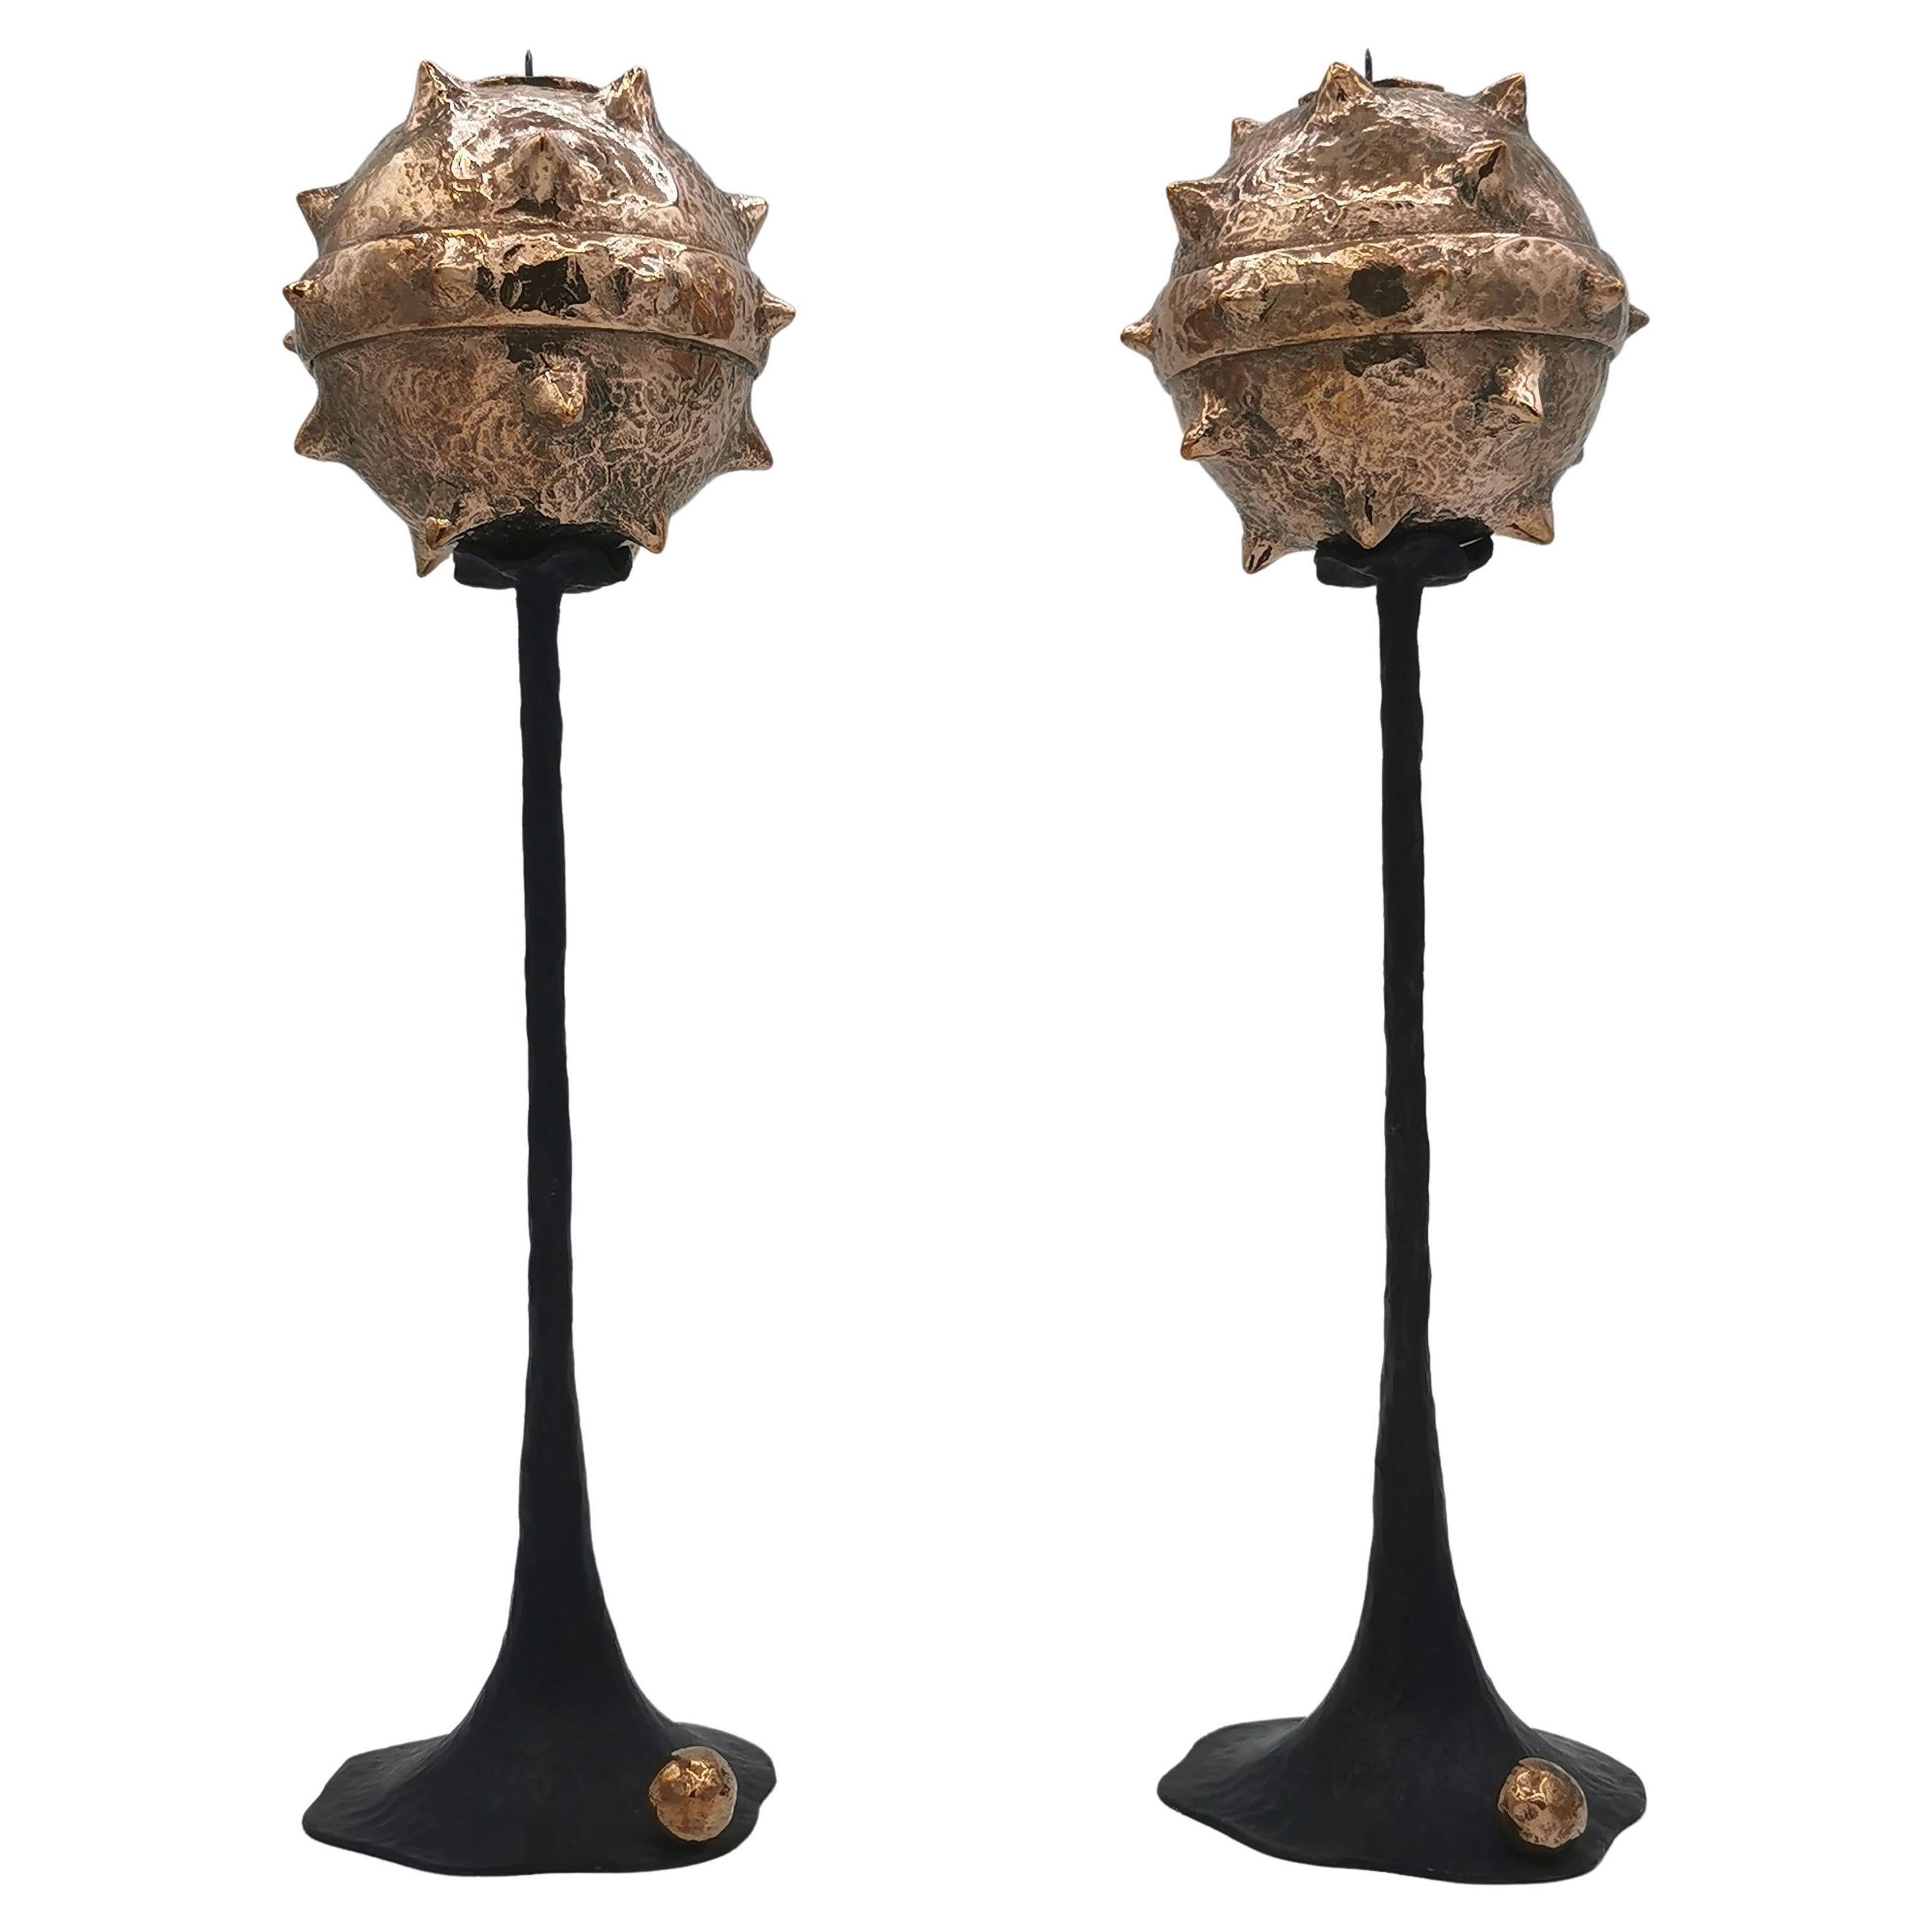 Set of 2 Primus Small Candlesticks by Emanuele Colombi